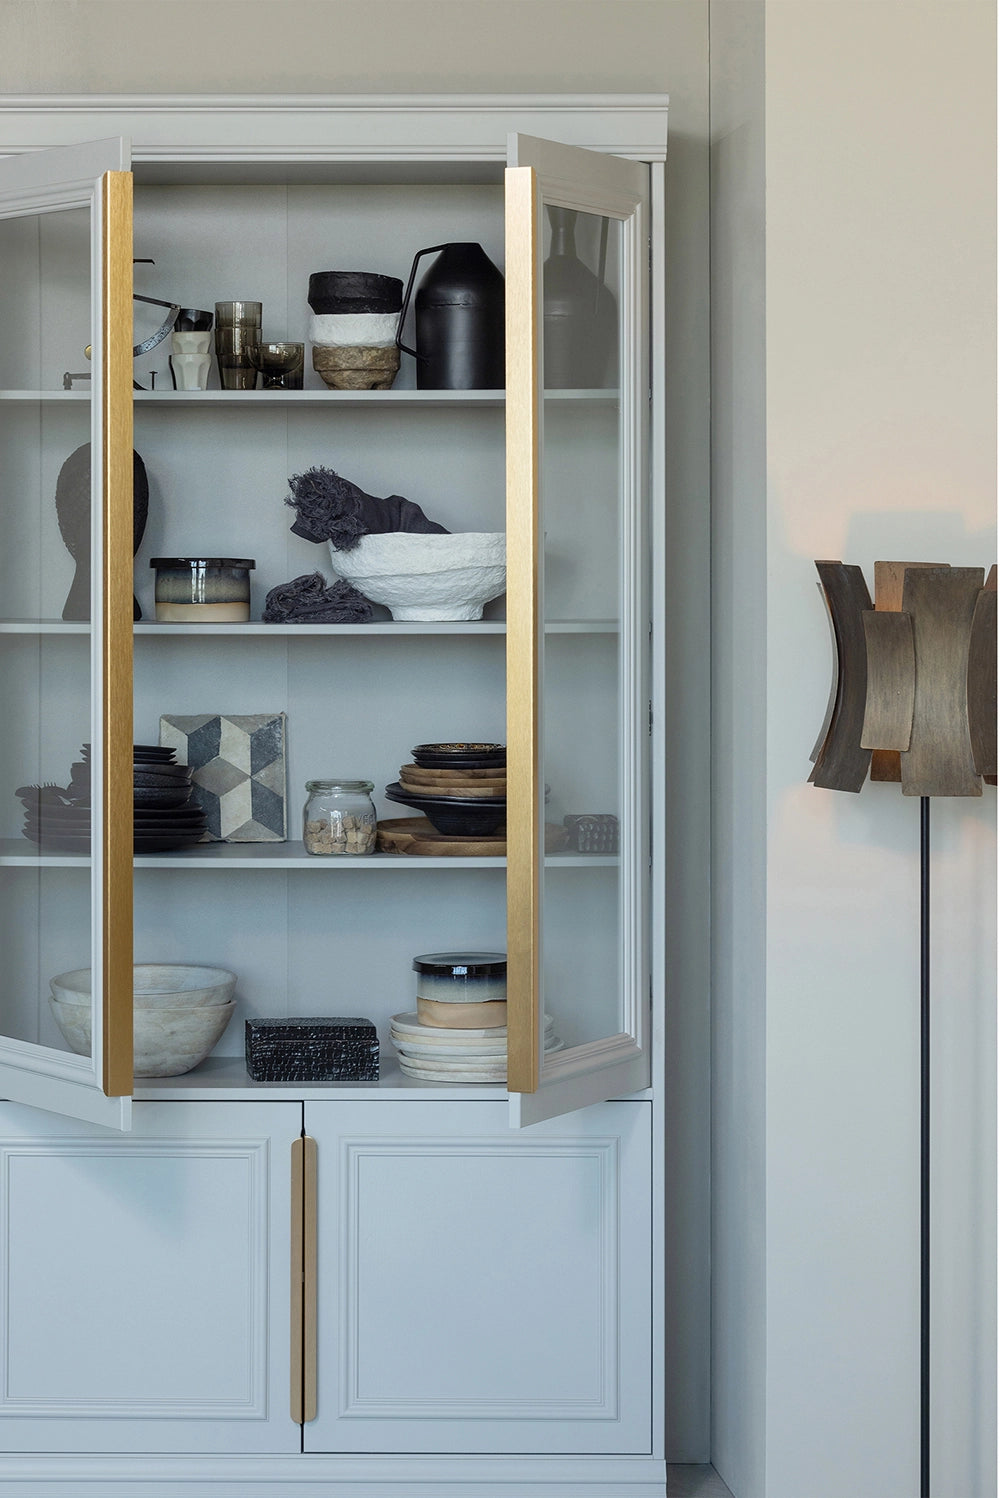 Maca Display Cabinet in Mist Finish with Utensils and Standing Lamp in Living Room Setting